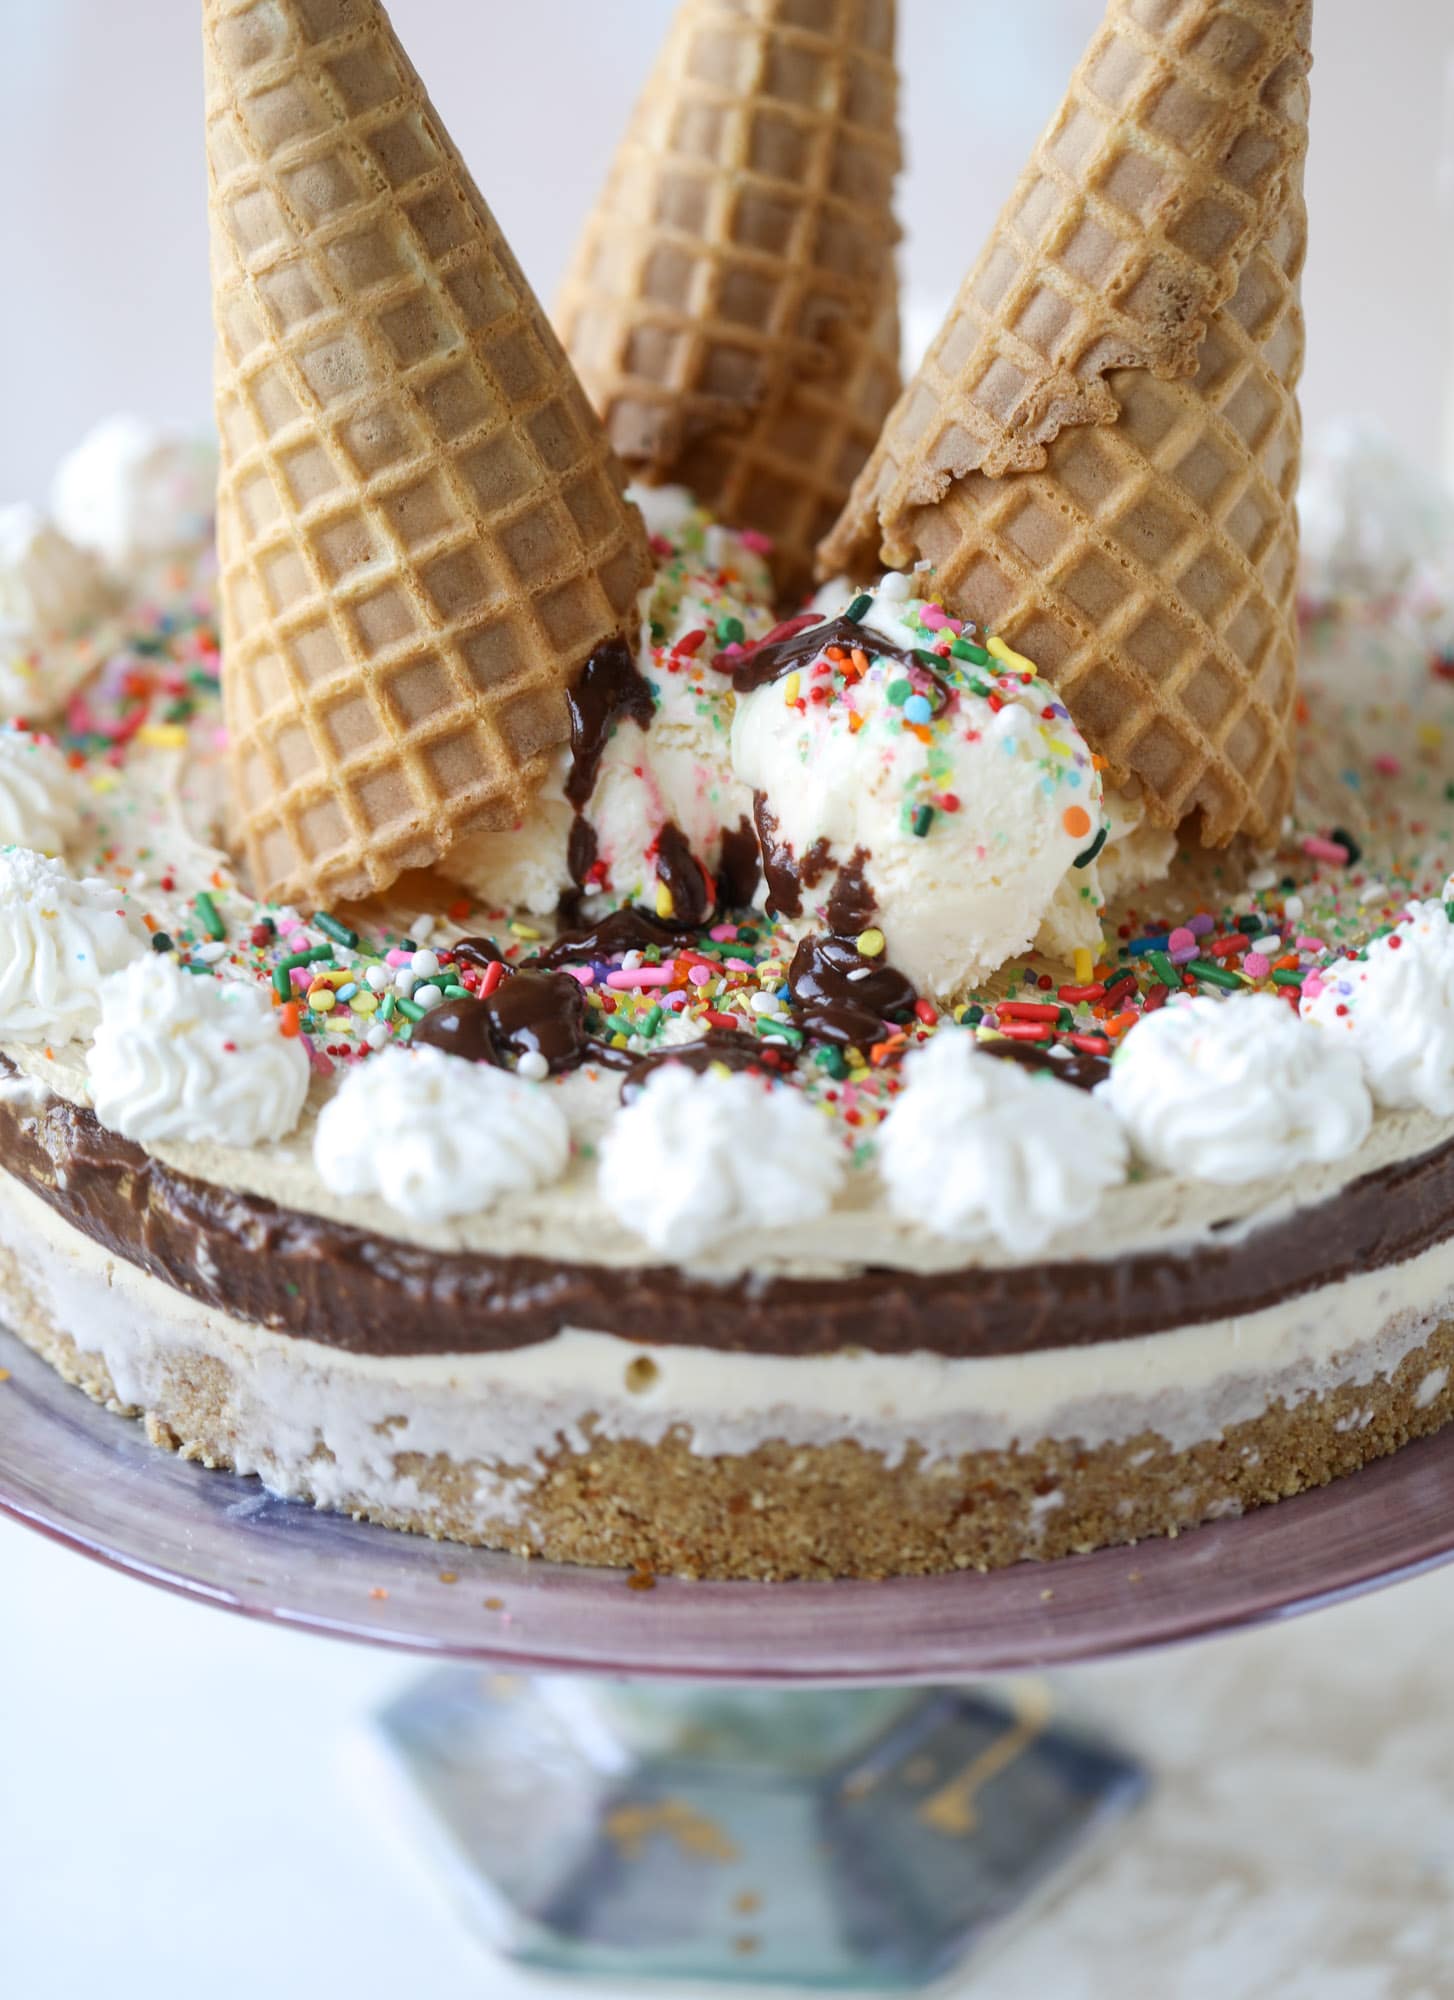 This peanut butter fudge ice cream cake is absolutely insane and perfect for summer! A sweet and savory pretzel crust, vanilla ice cream, homemade hot fudge and a peanut butter whipped cream layer take it to the next LEVEL. Delicious! I howsweeteats.com #icecream #cake #peanutbutter #chocolate #pretzel